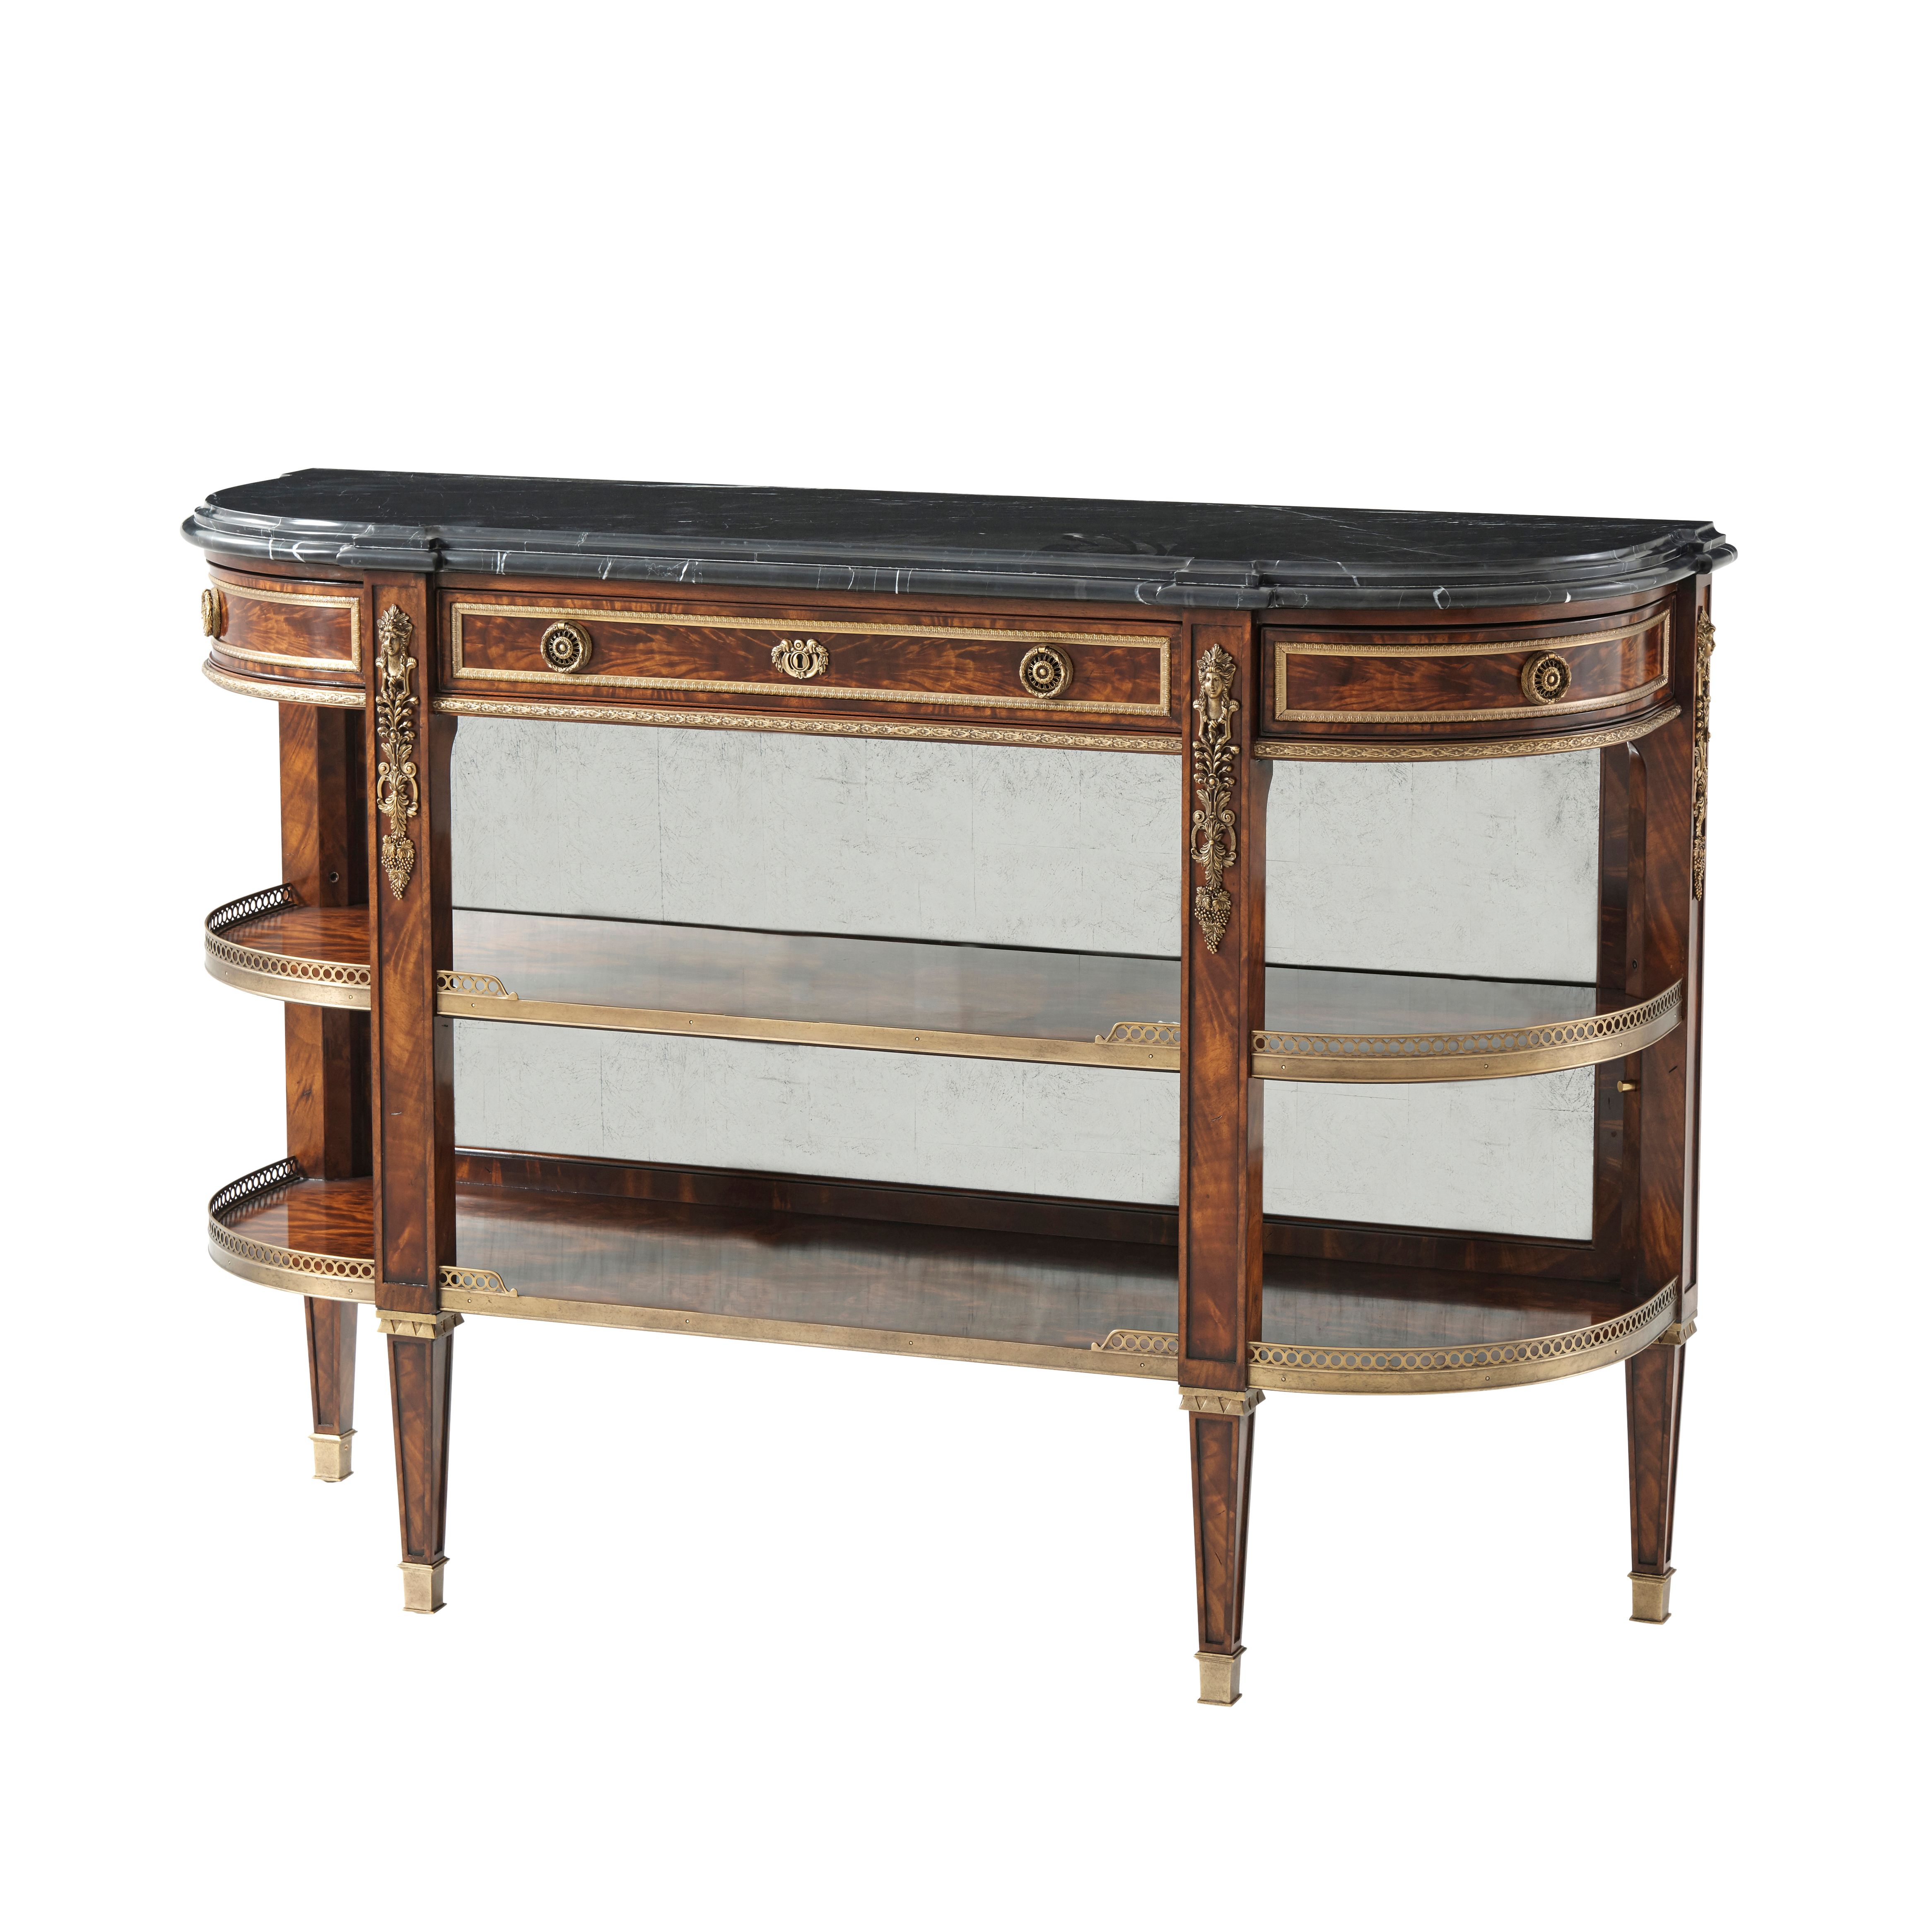 VICTORIAN BREAK BOWFRONT CONSOLE TABLE